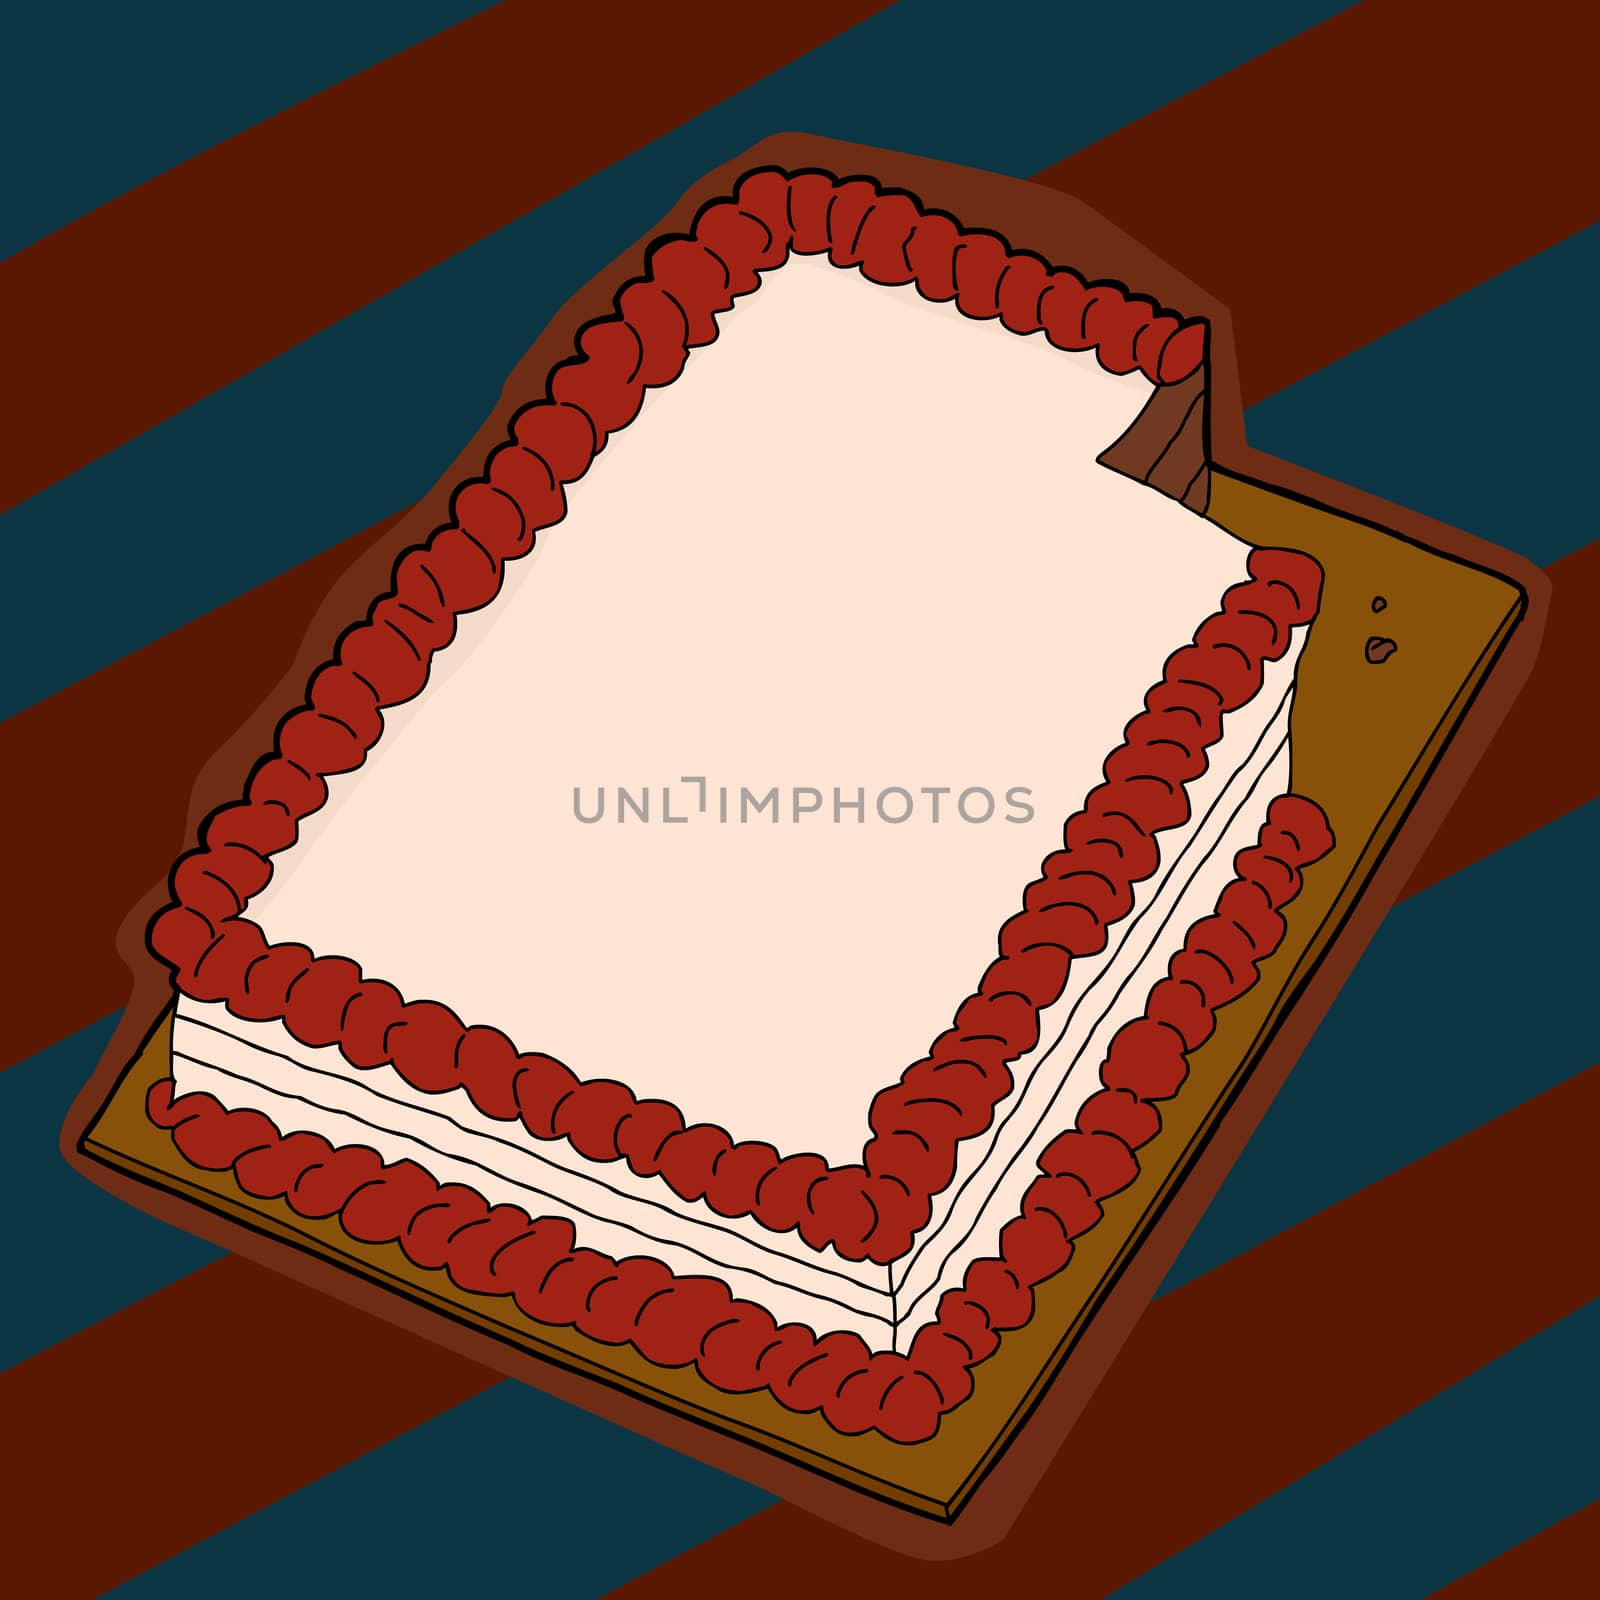 Fancy sheet cake with missing piece over striped background